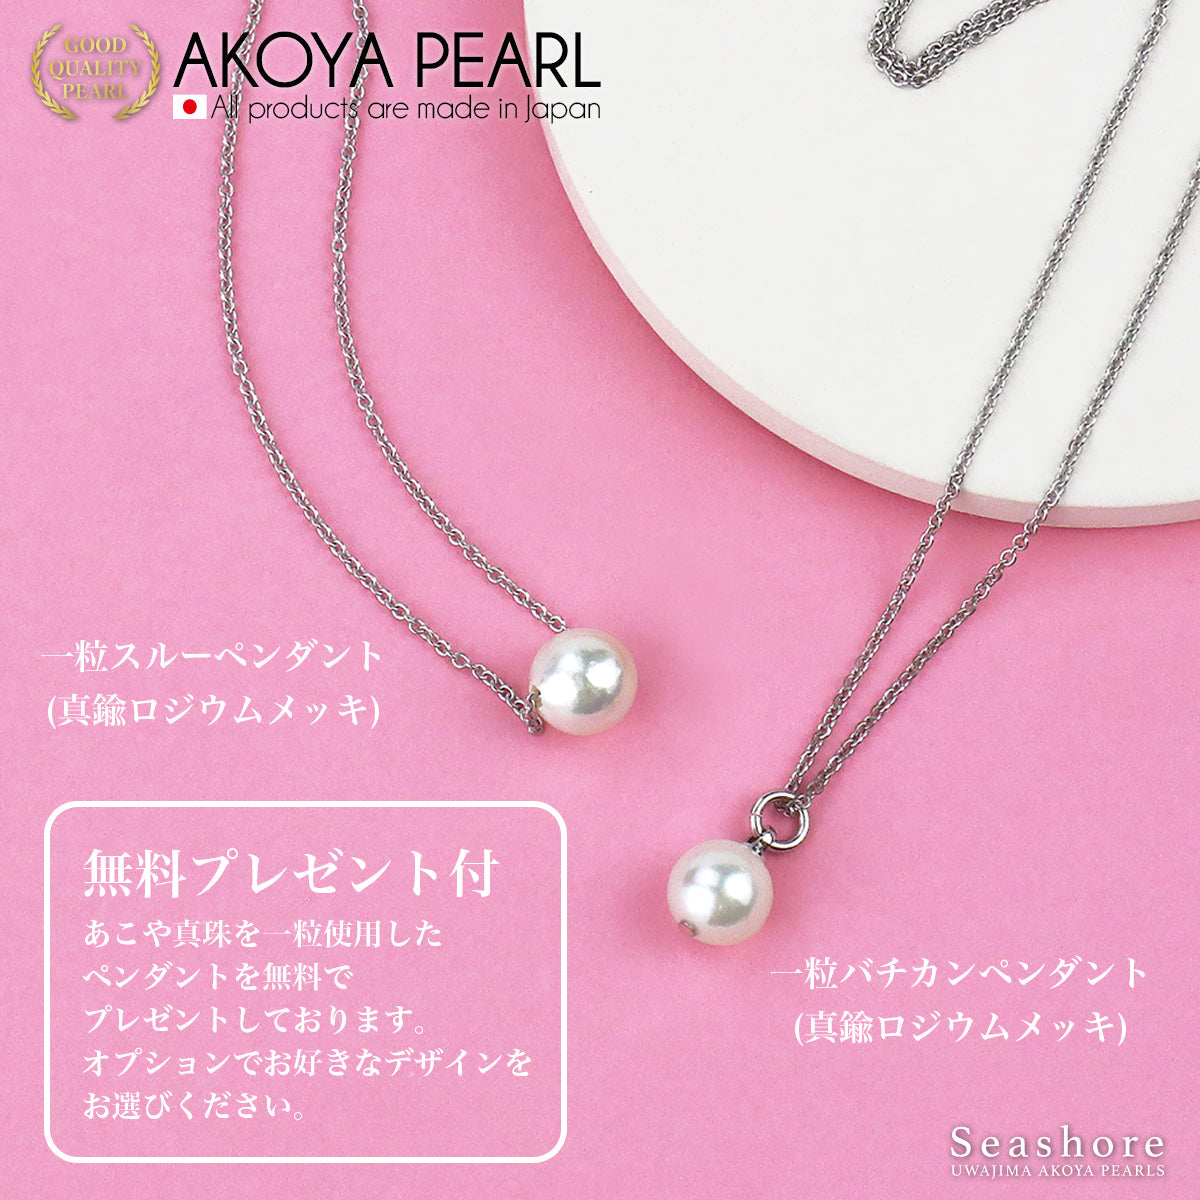 [Natural White] Uncolored Akoya Pearl Formal Necklace Set of 2 [8.5-9.0mm] (Earrings/Earrings) Certificate of Authenticity Storage Case Included Ceremonies